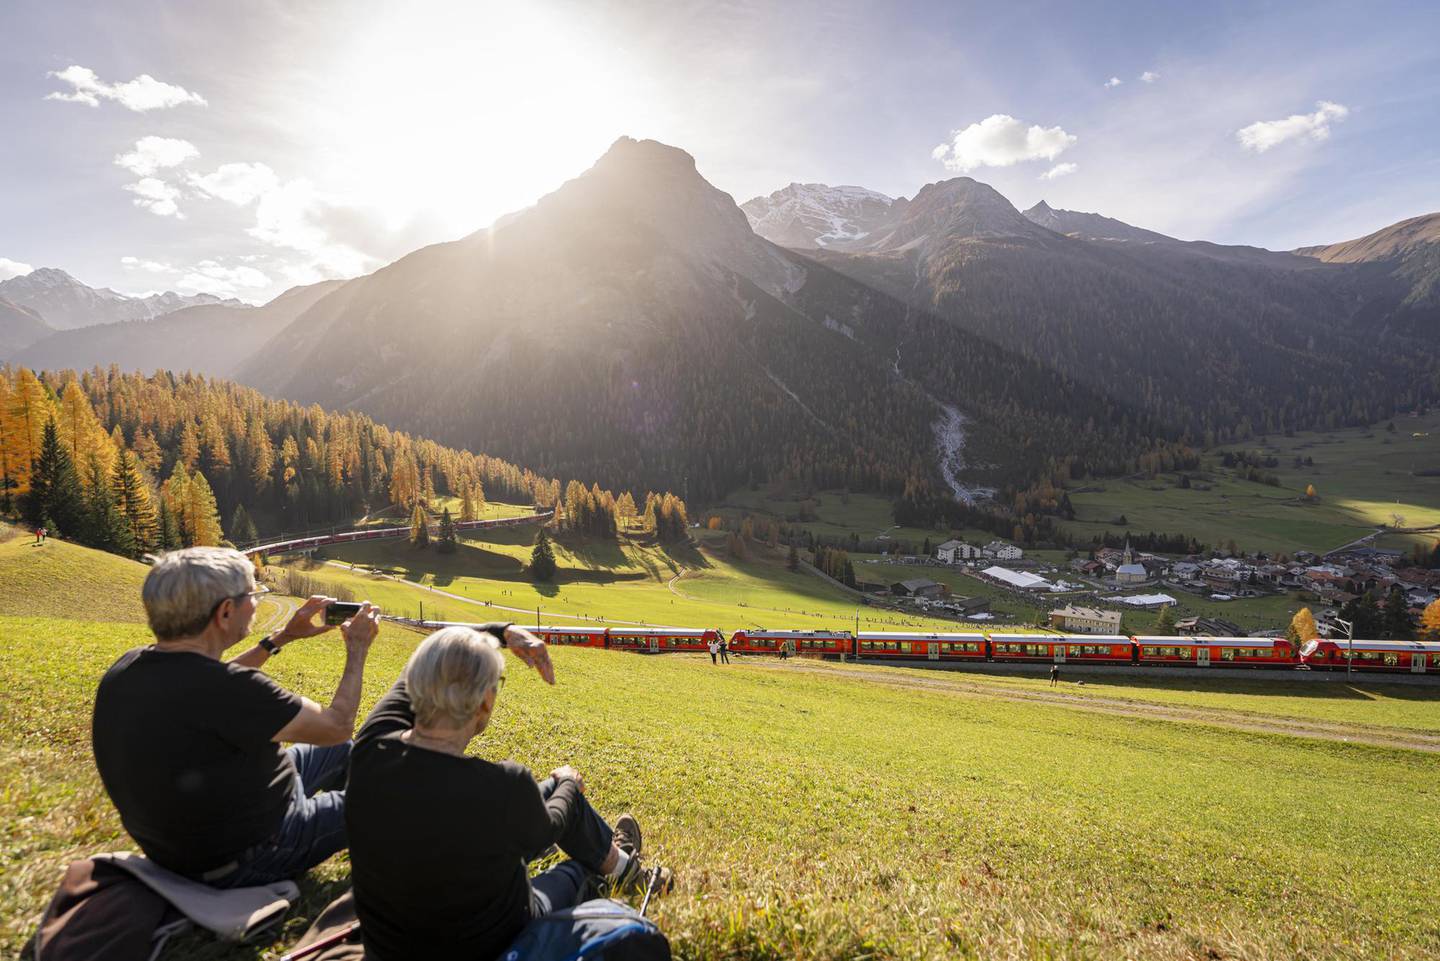 Around 3000 people attended the festival and lined the rails in Bergün to welcome the world's longest passenger train. Photo / Yanik Buerkli, Keystone; AP